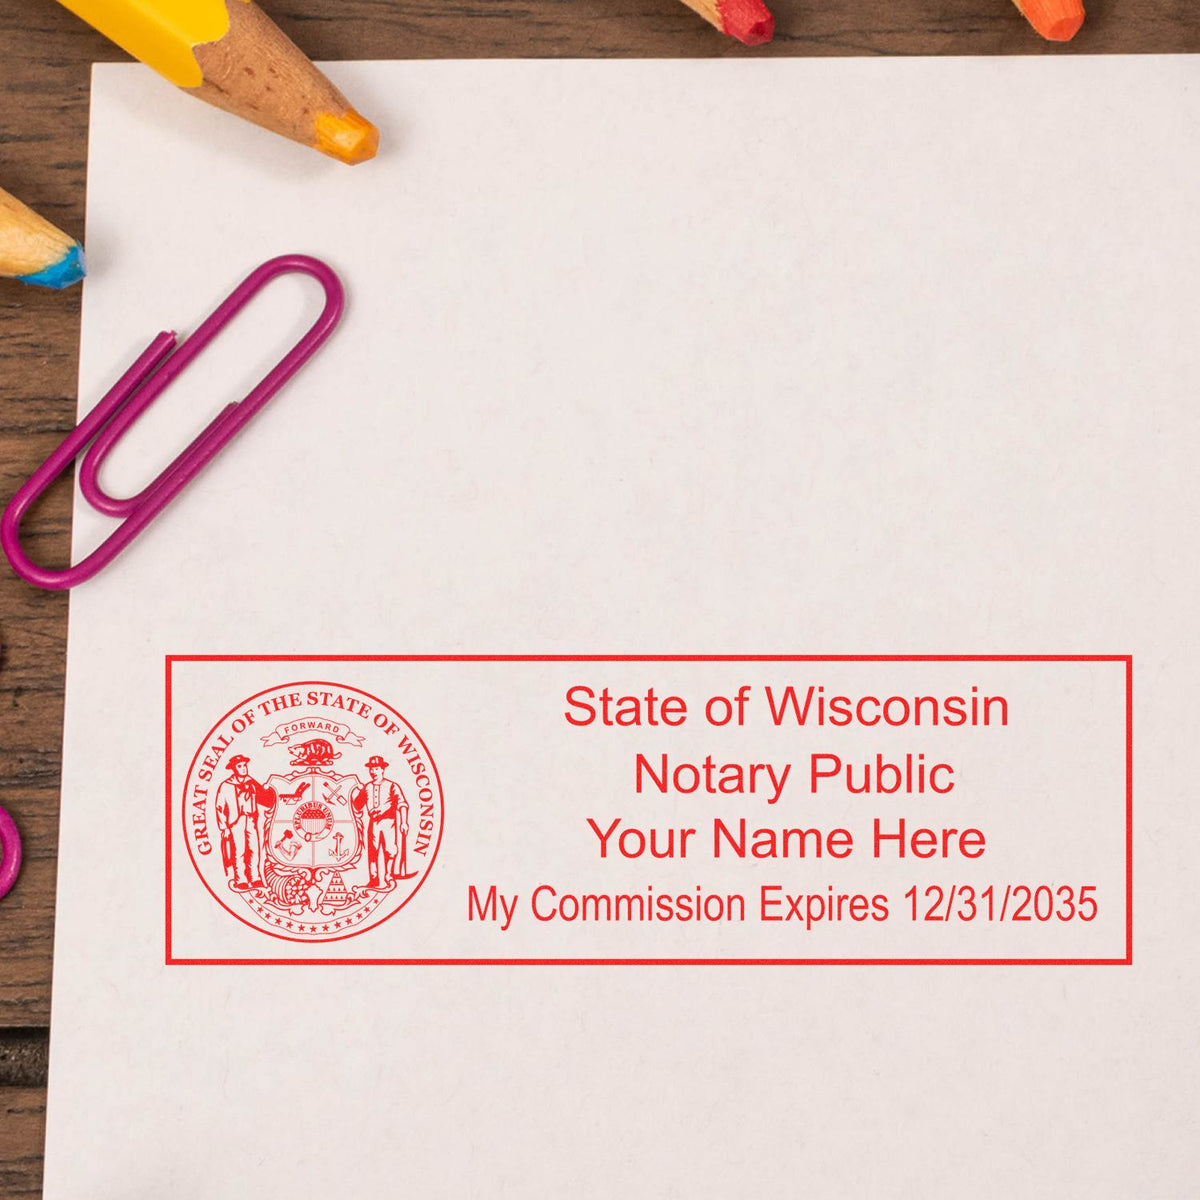 An alternative view of the MaxLight Premium Pre-Inked Wisconsin State Seal Notarial Stamp stamped on a sheet of paper showing the image in use